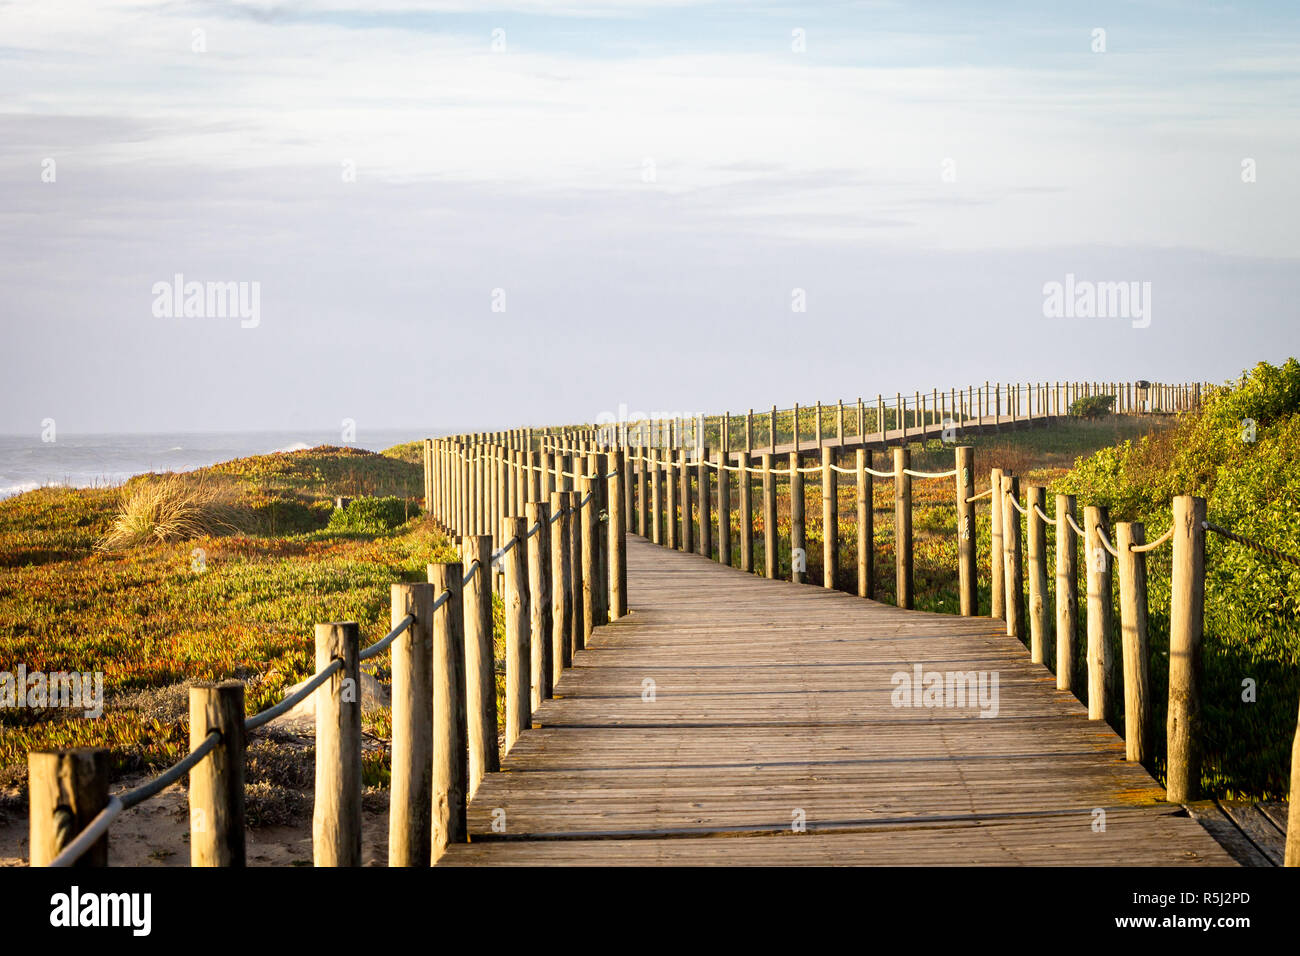 An empty wooden boardwalk goes along some vegetation against a cloudy background. Copy space. Stock Photo